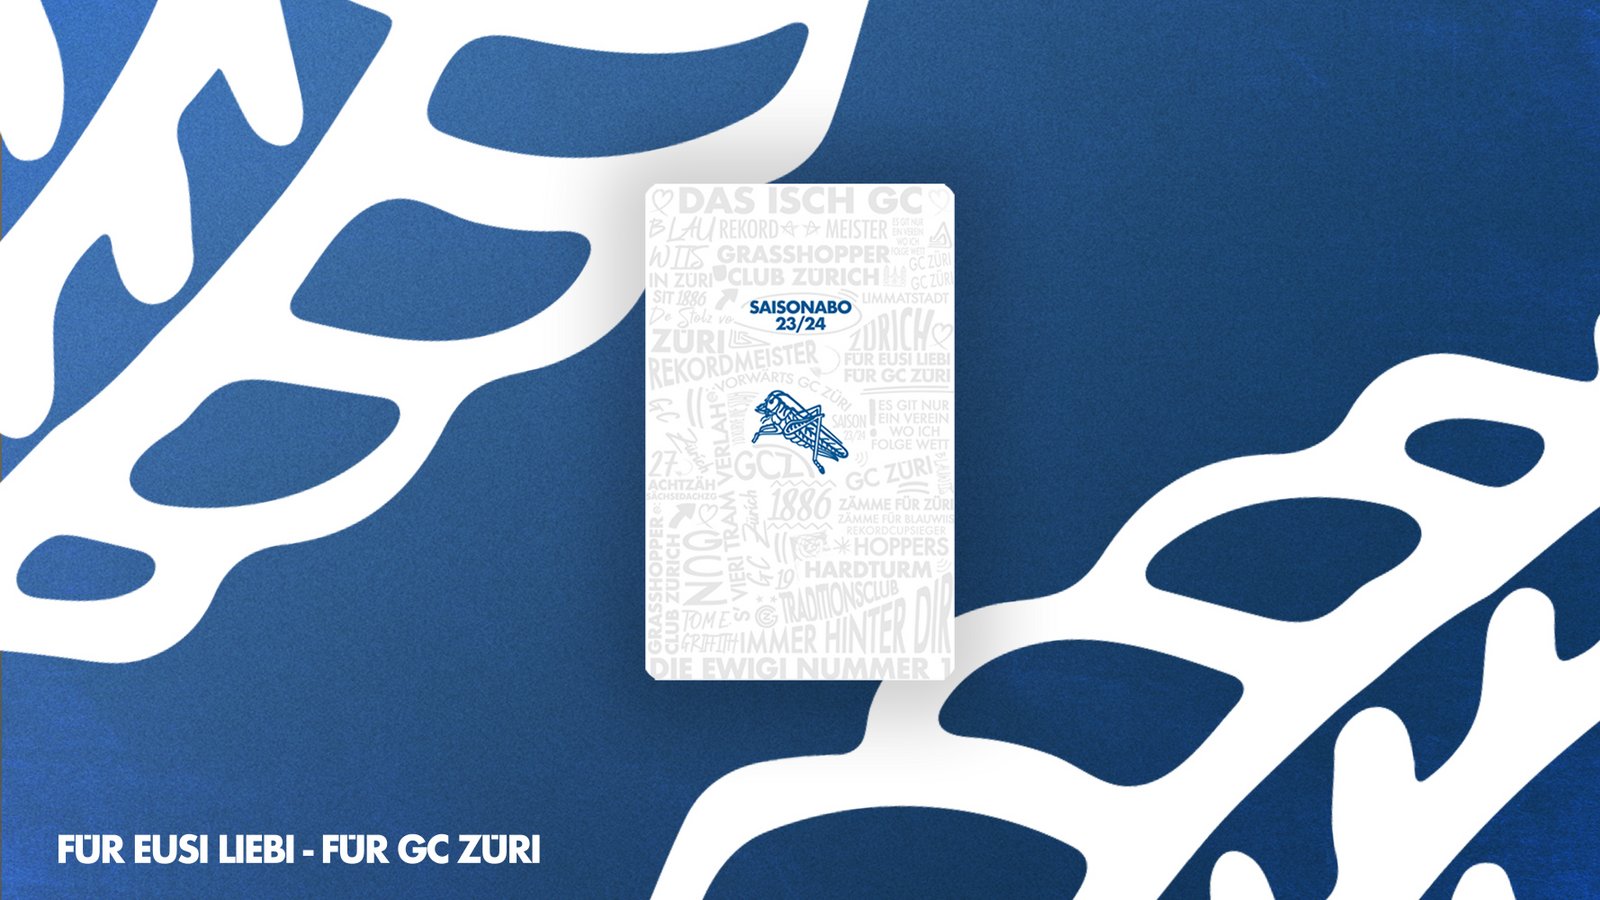 GET YOUR SEASON TICKET 23/24 AND SHOW YOUR BLUE AND WHITE HEART